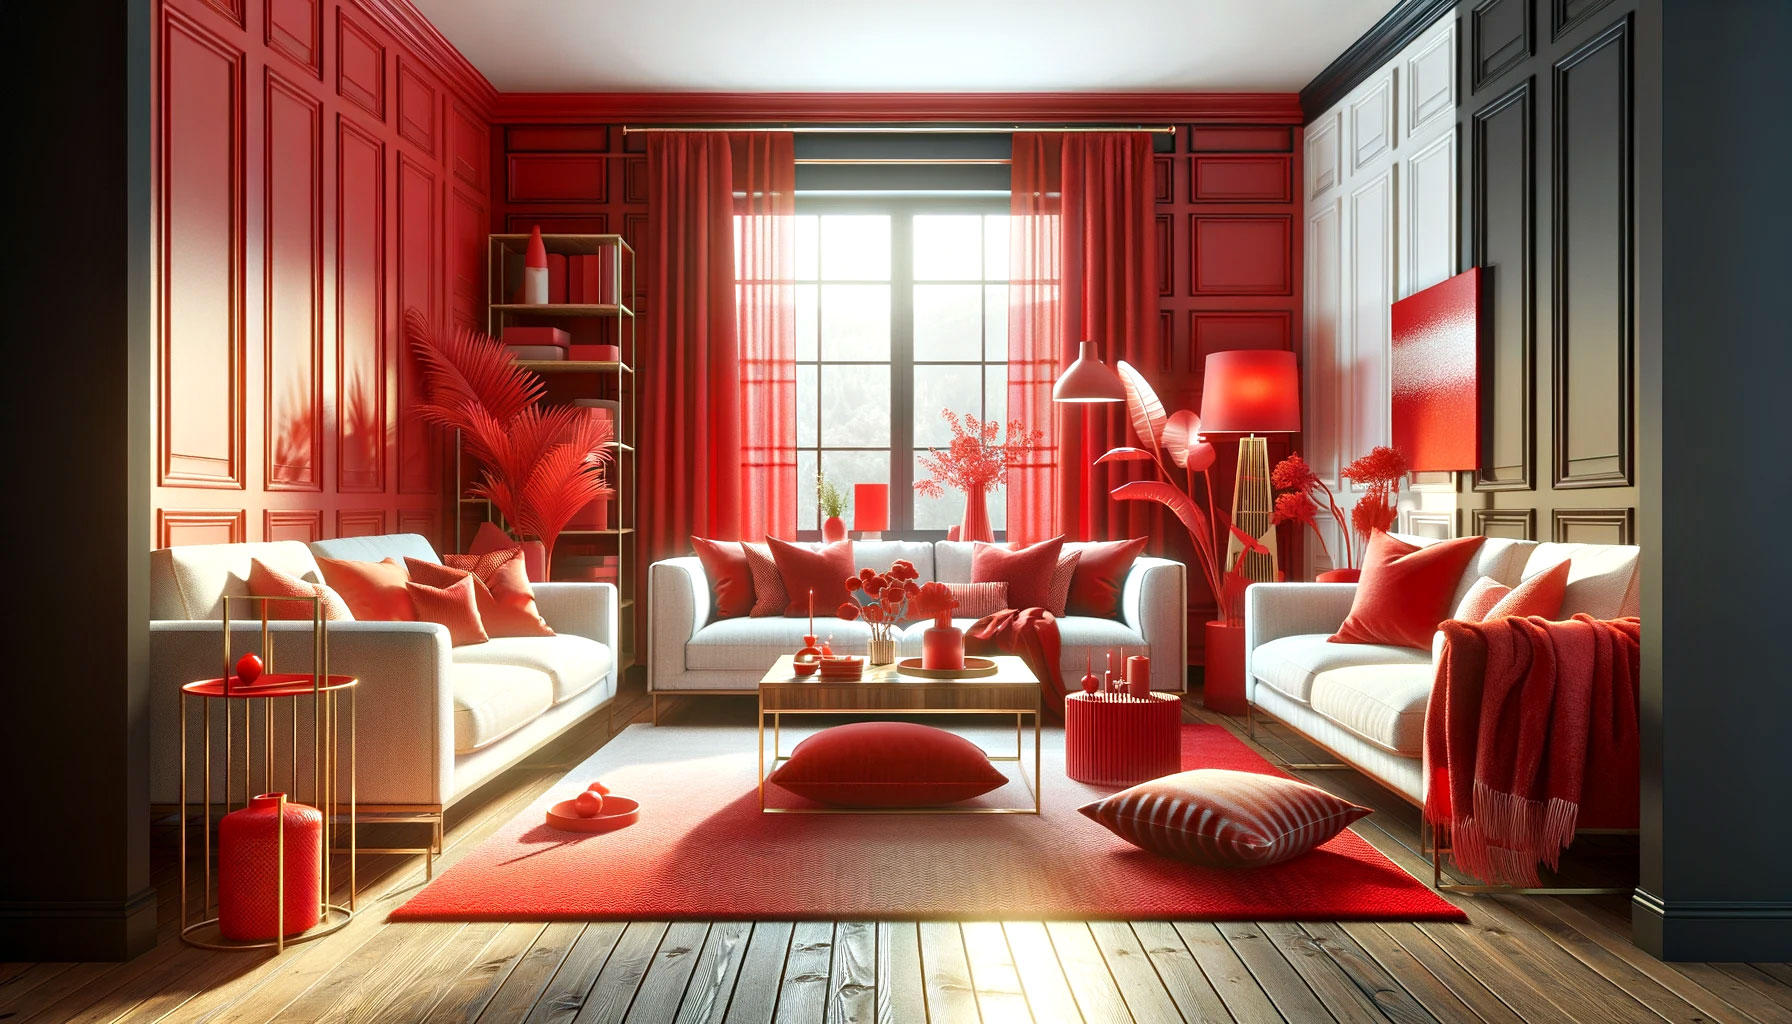 The Colour Psychology of Red in Interior Design